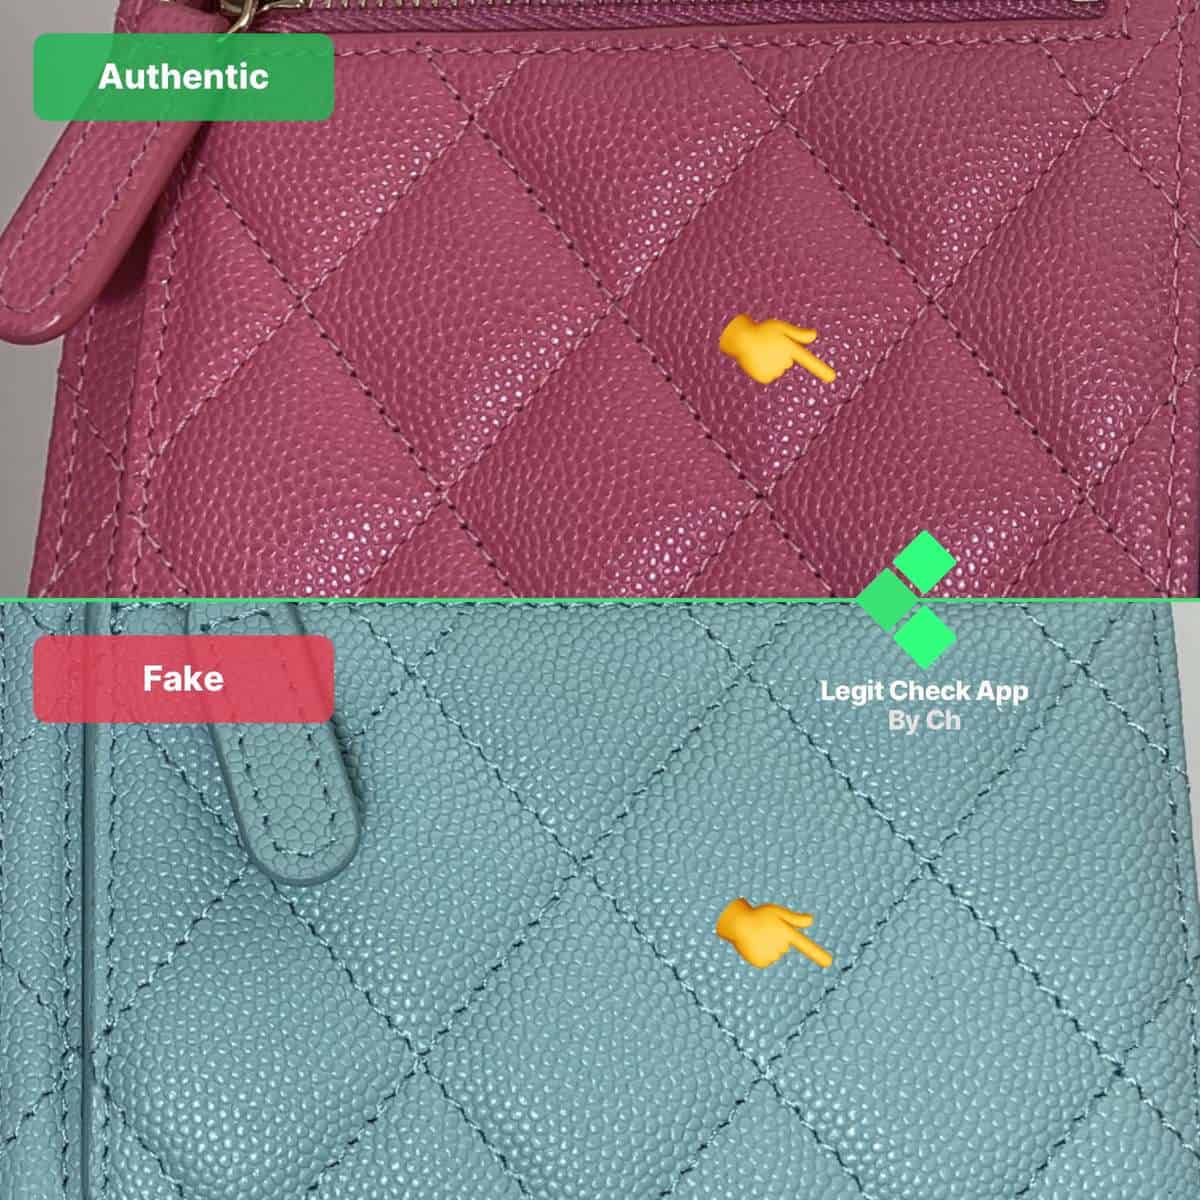 How To Authenticate Chanel Wallets: Fake Vs Real Guide